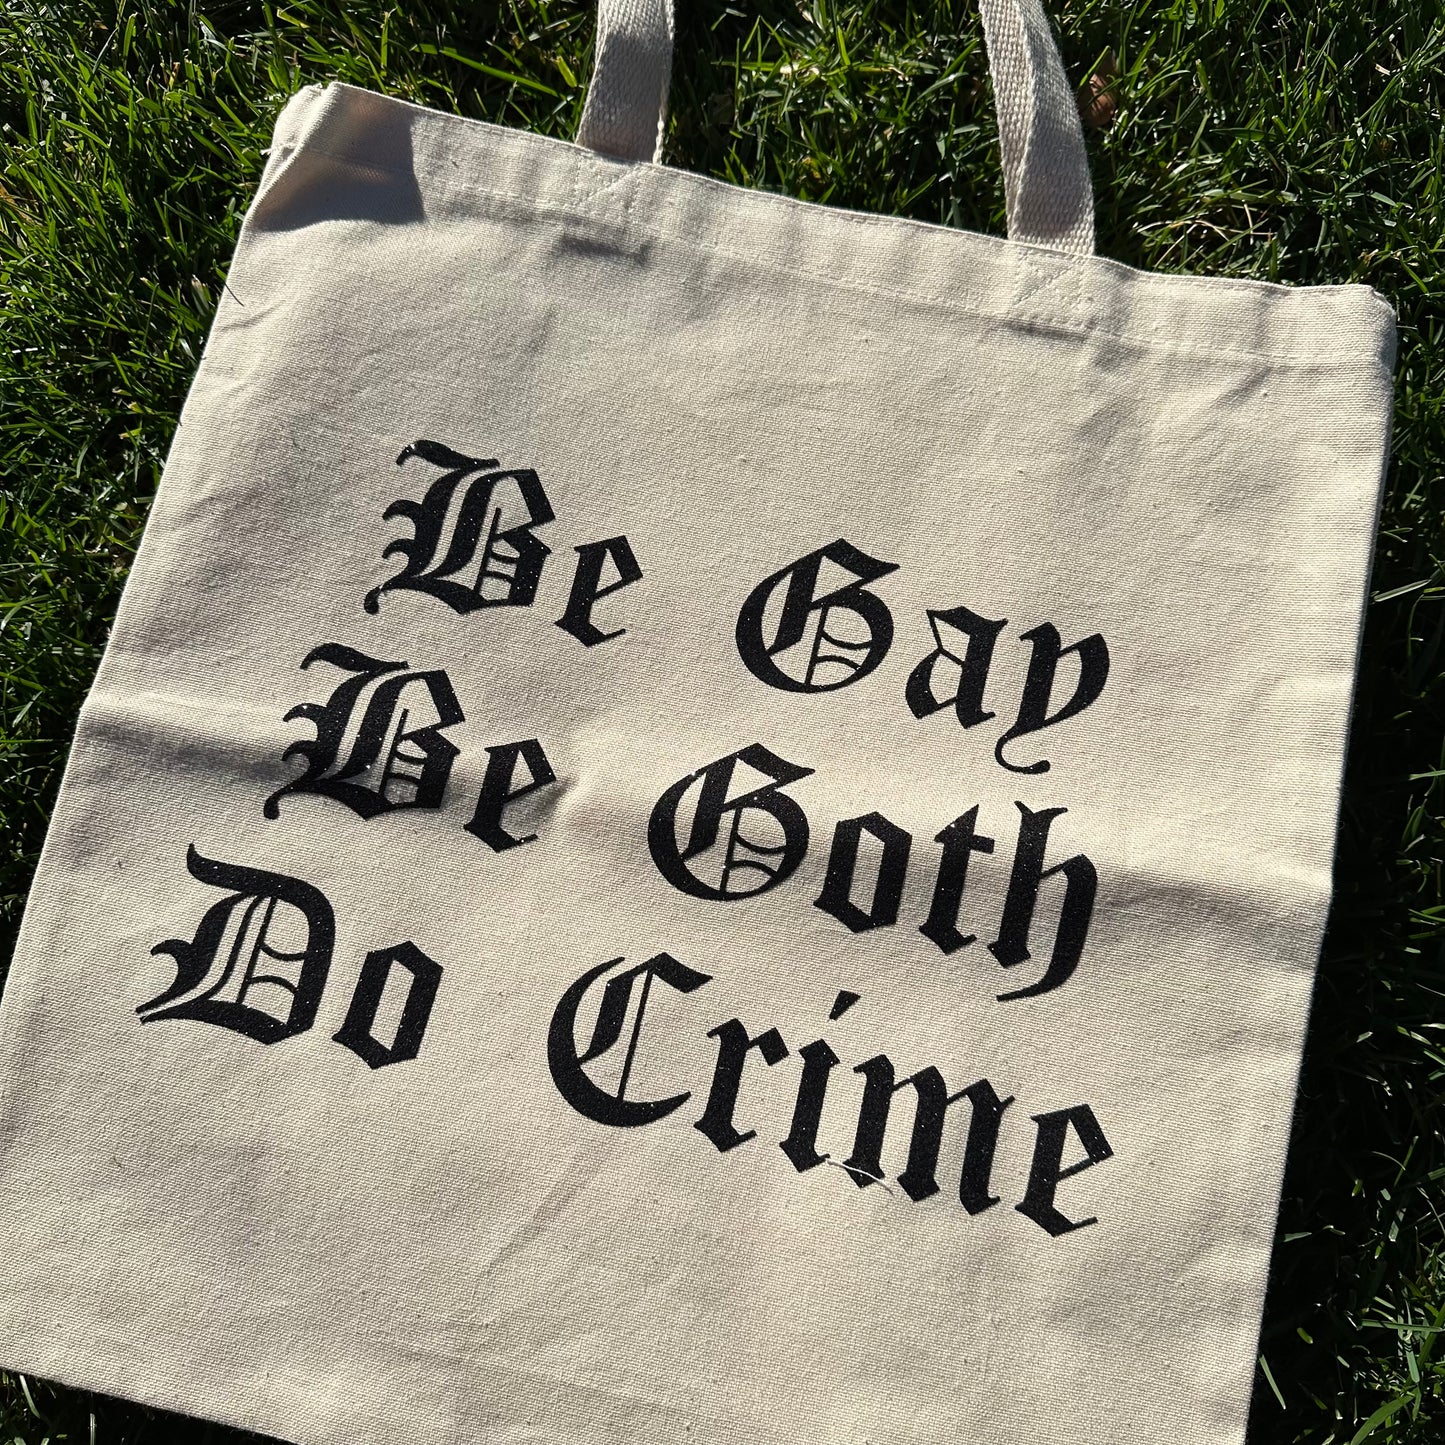 Be Gay, Do Crime Tote